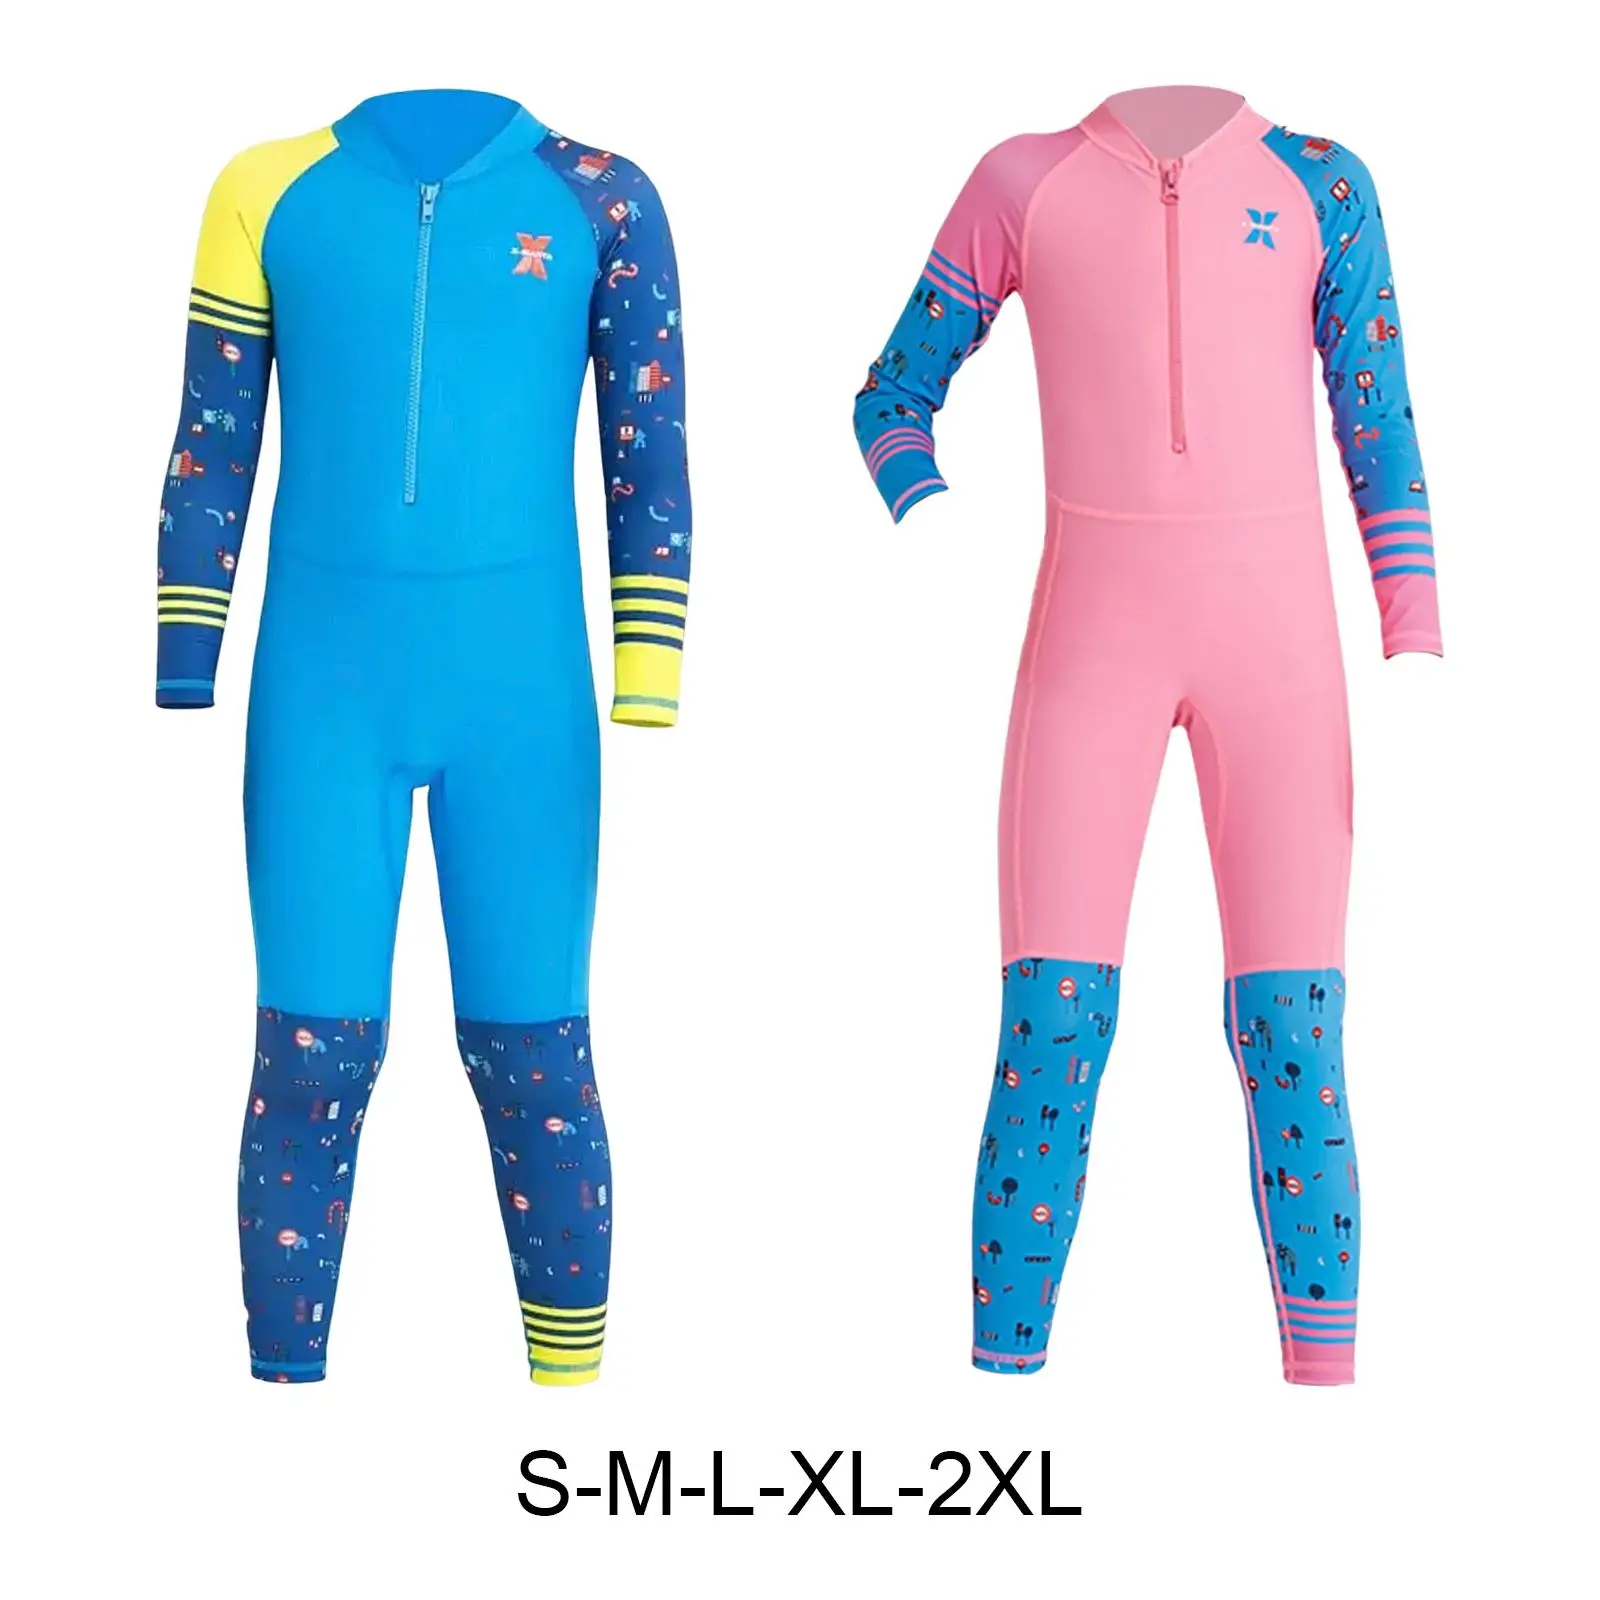 Kids Wetsuit Diving Swimsuits Waterproof Surfing Quick Drying Water Sports